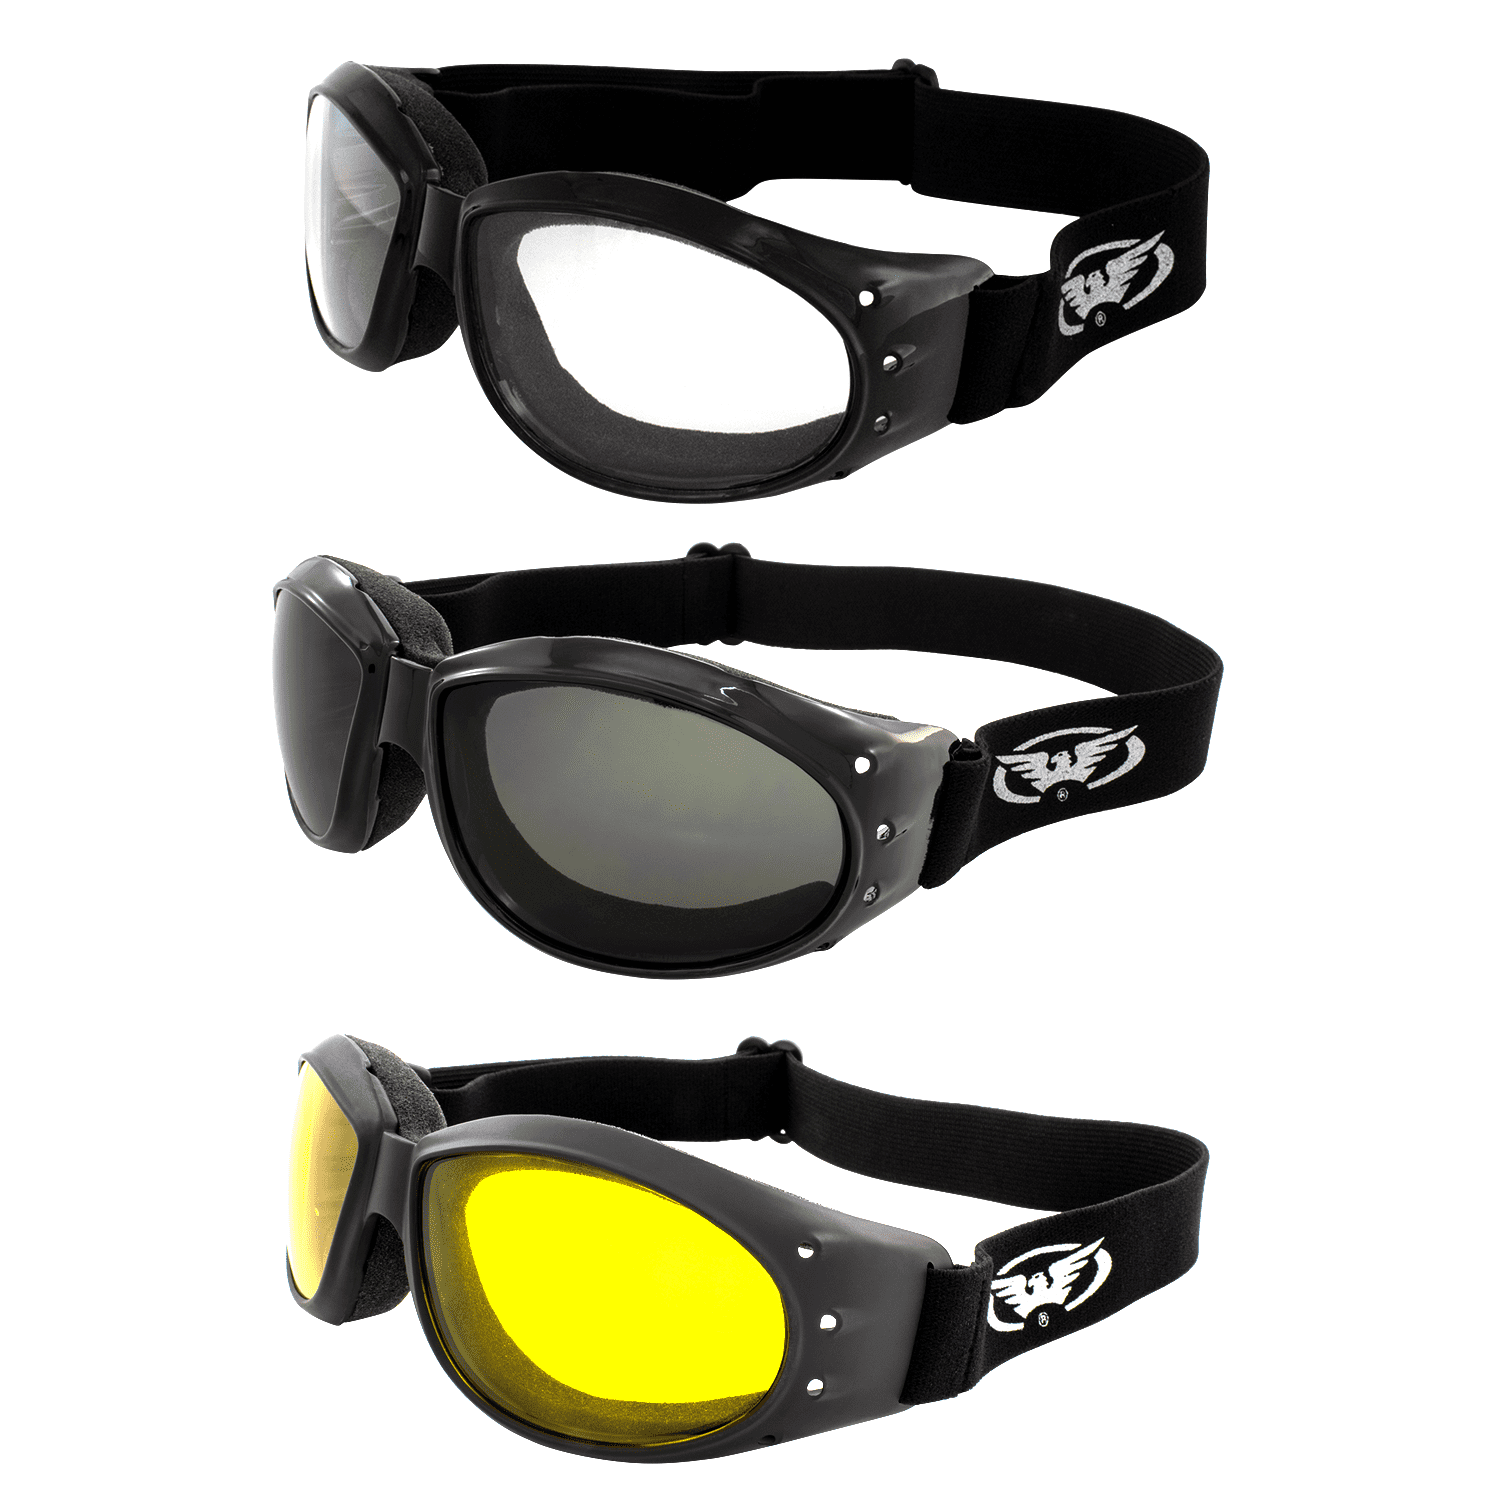 BIRDZ GOGGLES FOR MOTORCYCLE RIDING HAS 3 3 SETS OF LENS CLEAR SMOKE & YELLOW 